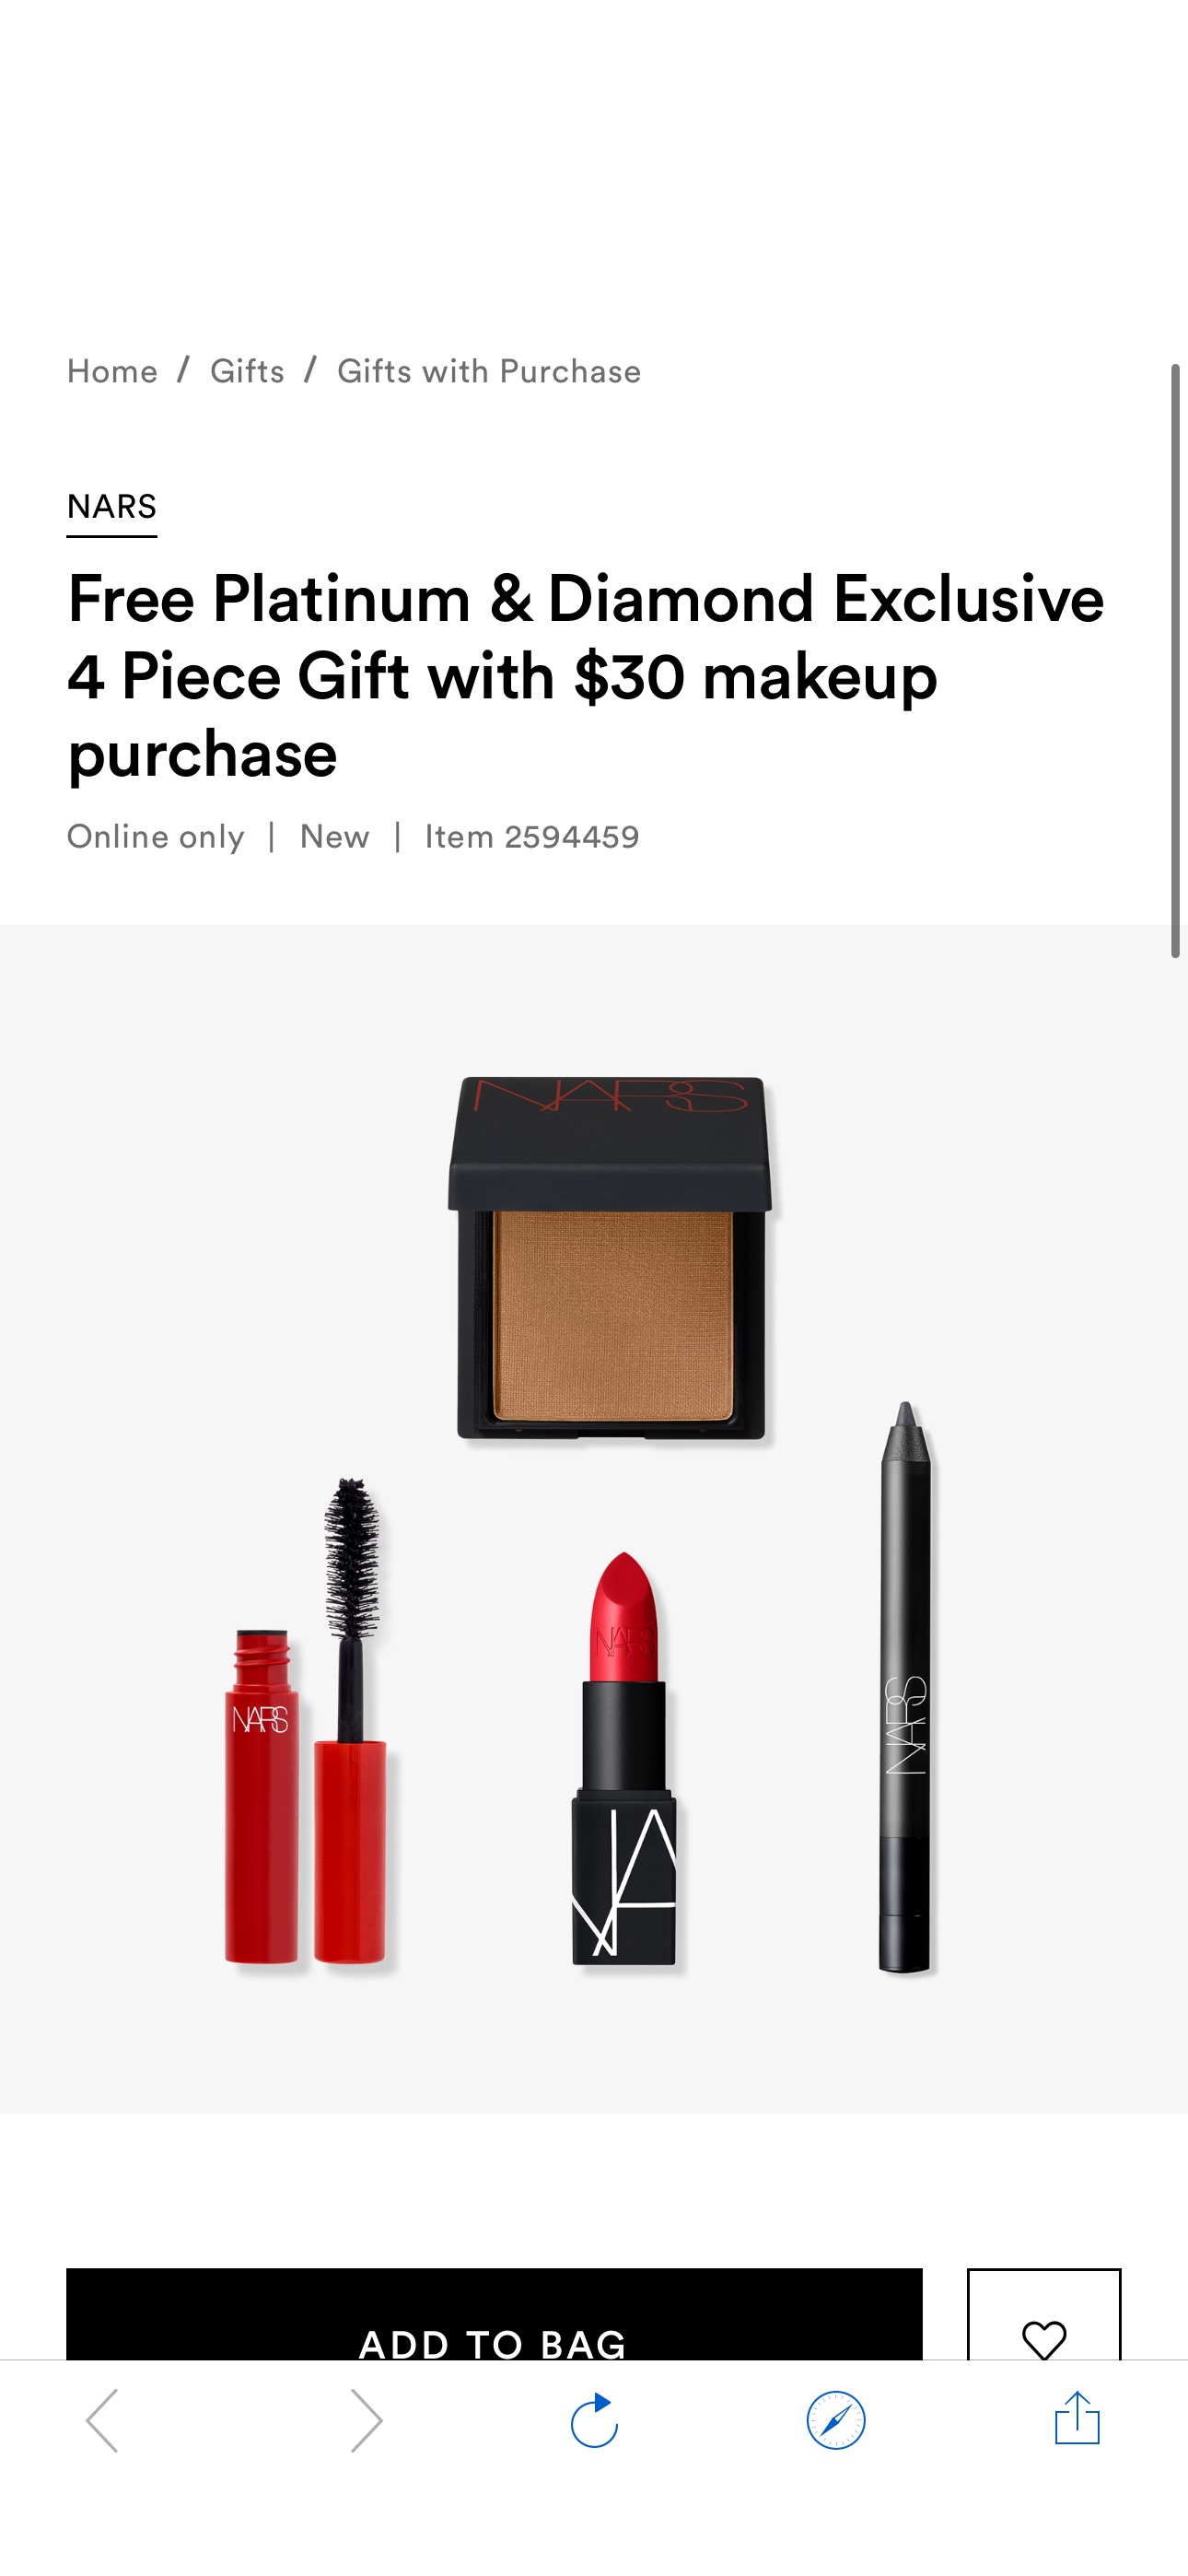 Free Platinum & Diamond Exclusive 4 Piece Gift with $30 makeup purchase - NARS | Ulta Beauty